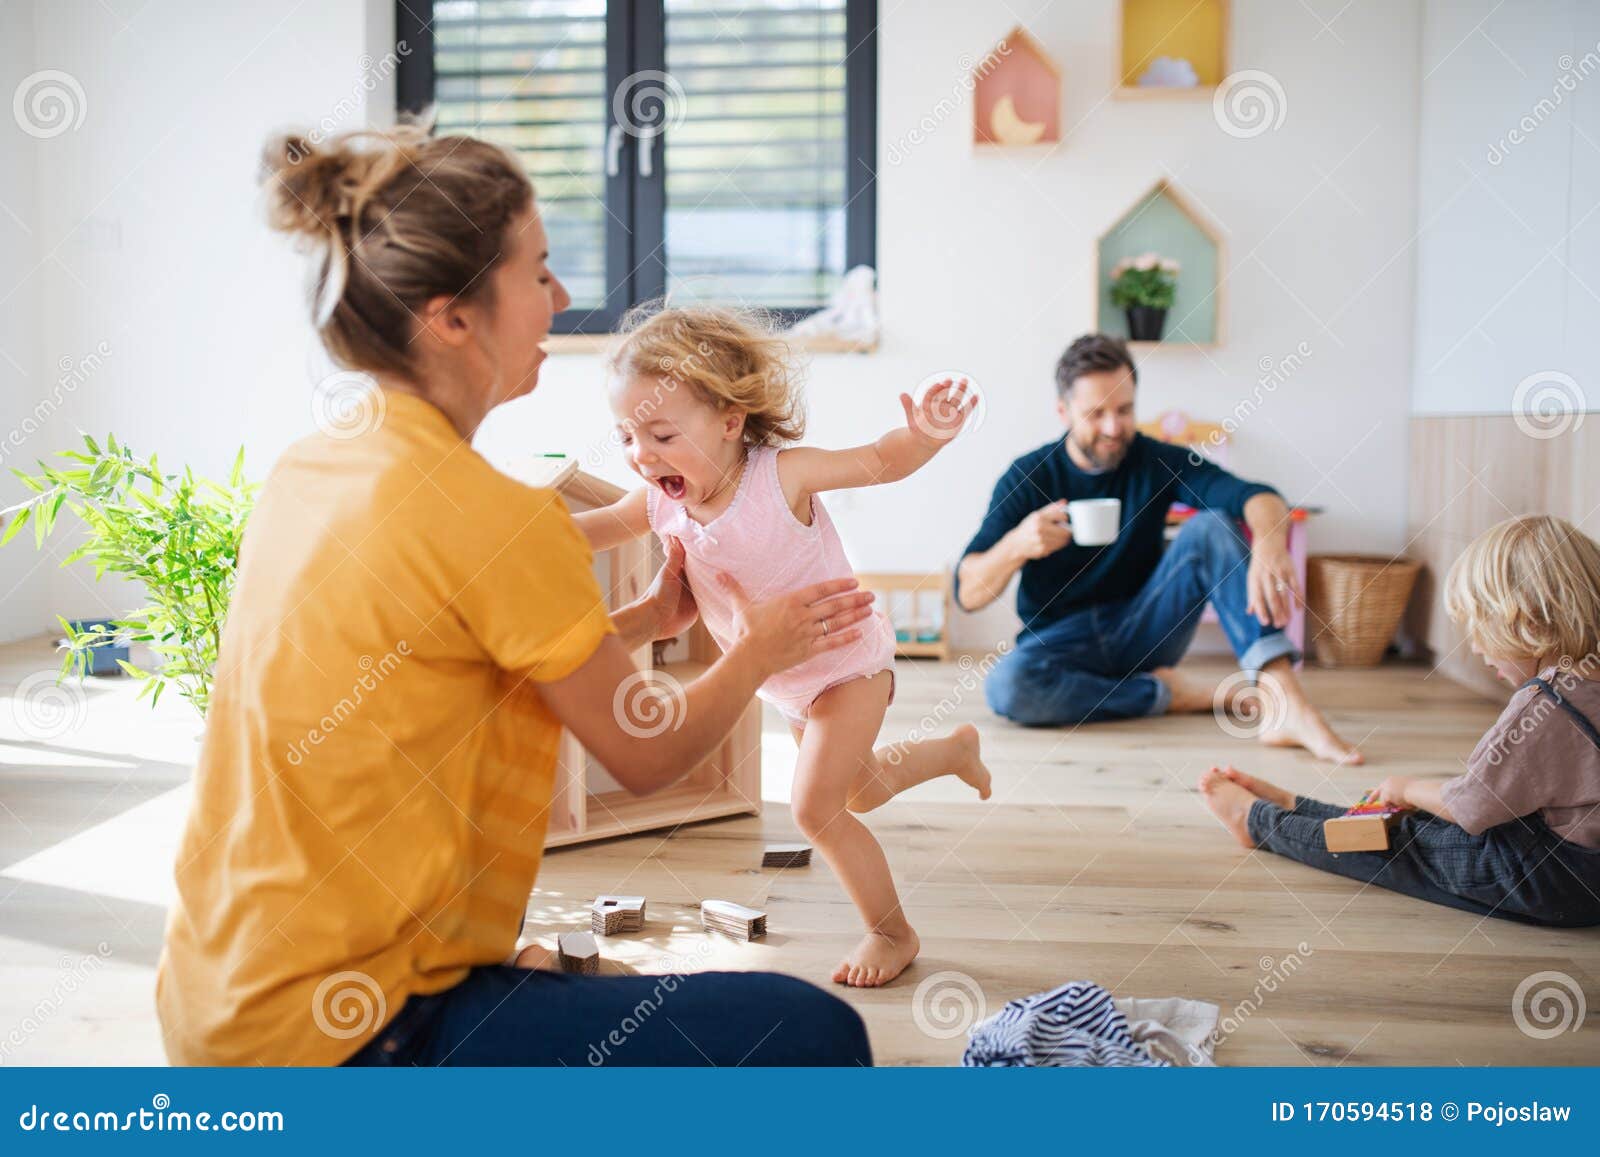 young family with two small children indoors in bedroom playing.